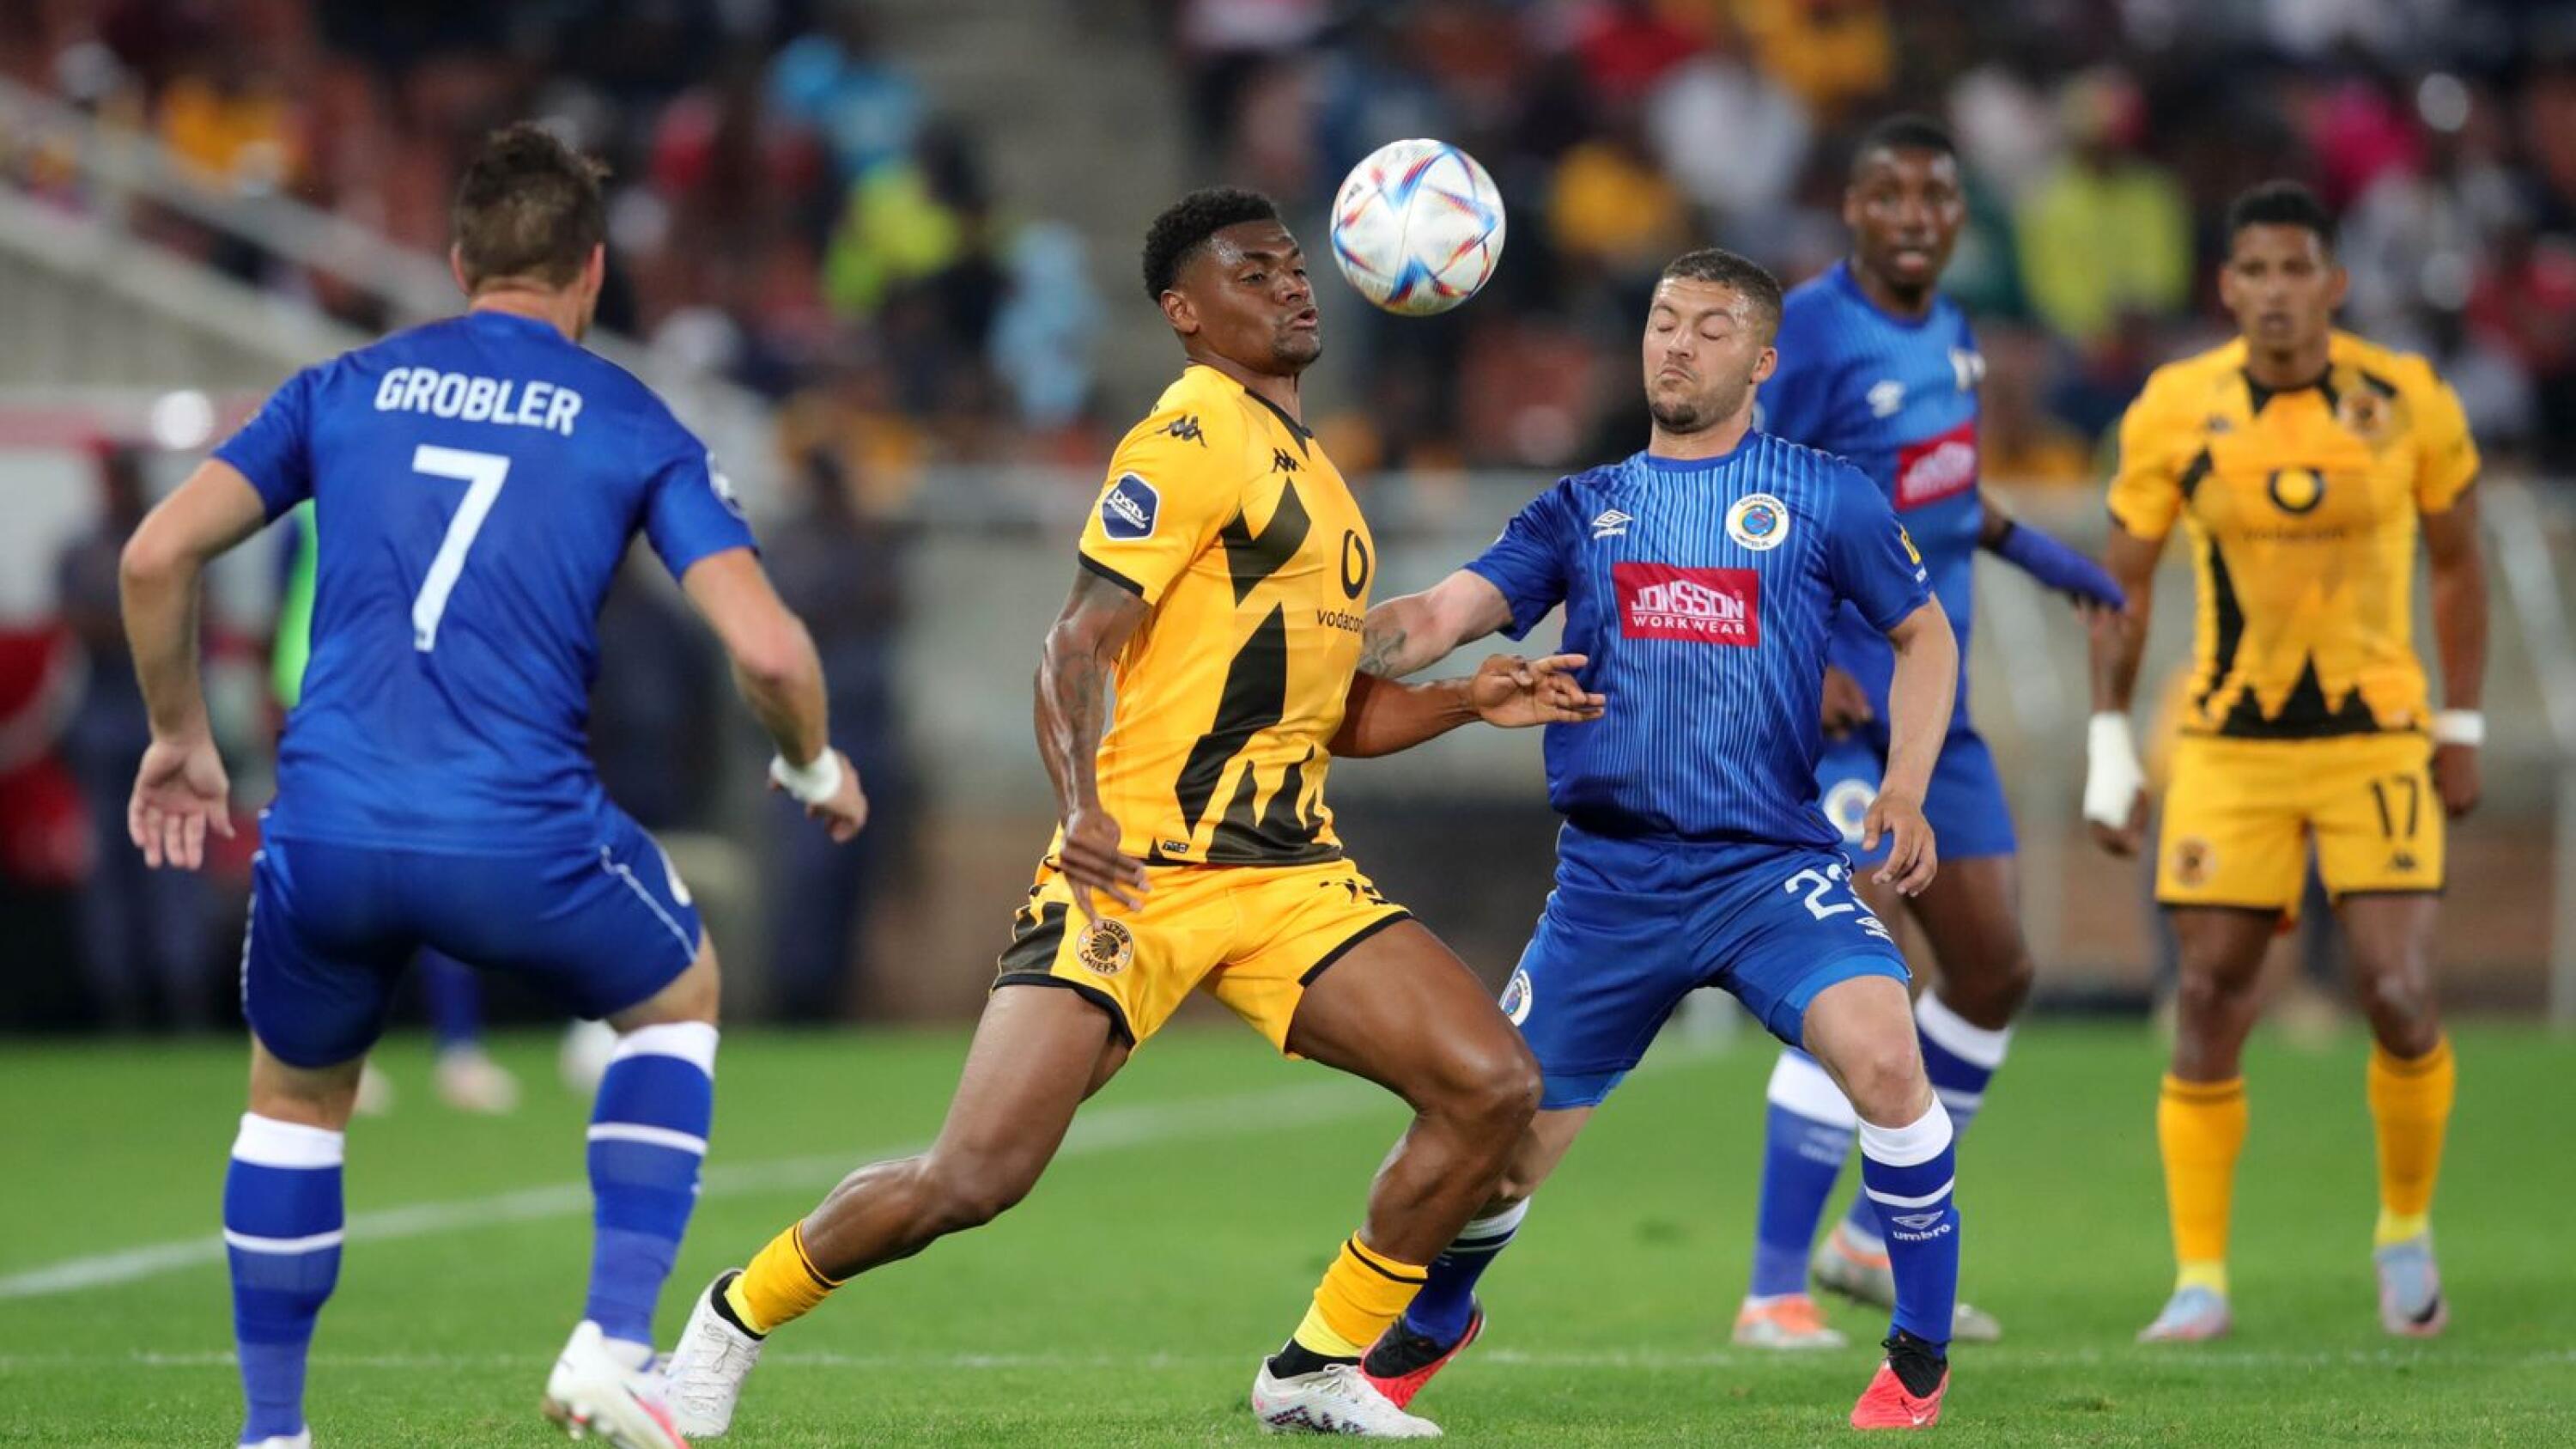 Jasond Gonzalez of Kaizer Chiefs is challenged by Grant Margeman of SuperSport United during their DStv Premiership match at Peter Mokaba Stadium in Polokwane on Wednesday